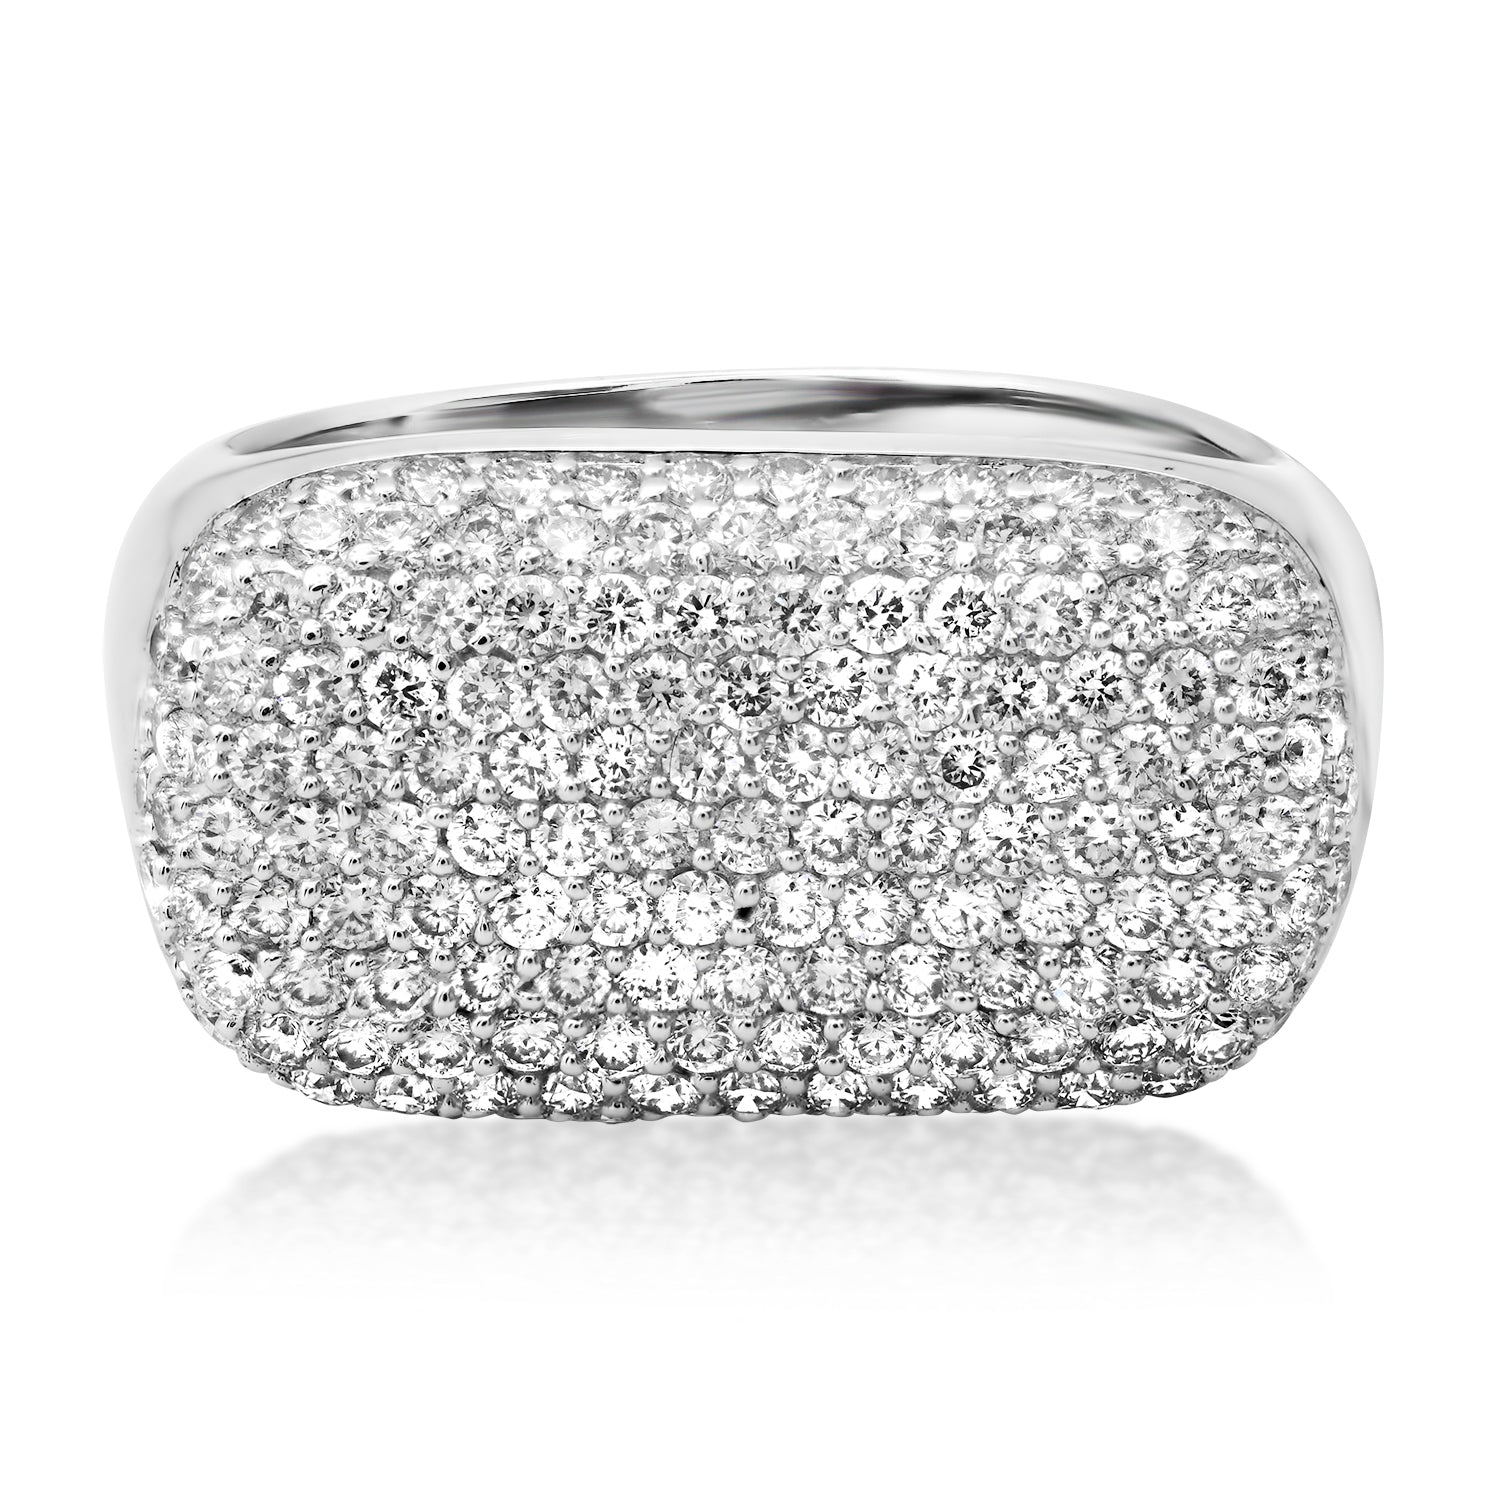 Diamond Drenched Statement Dome Ring